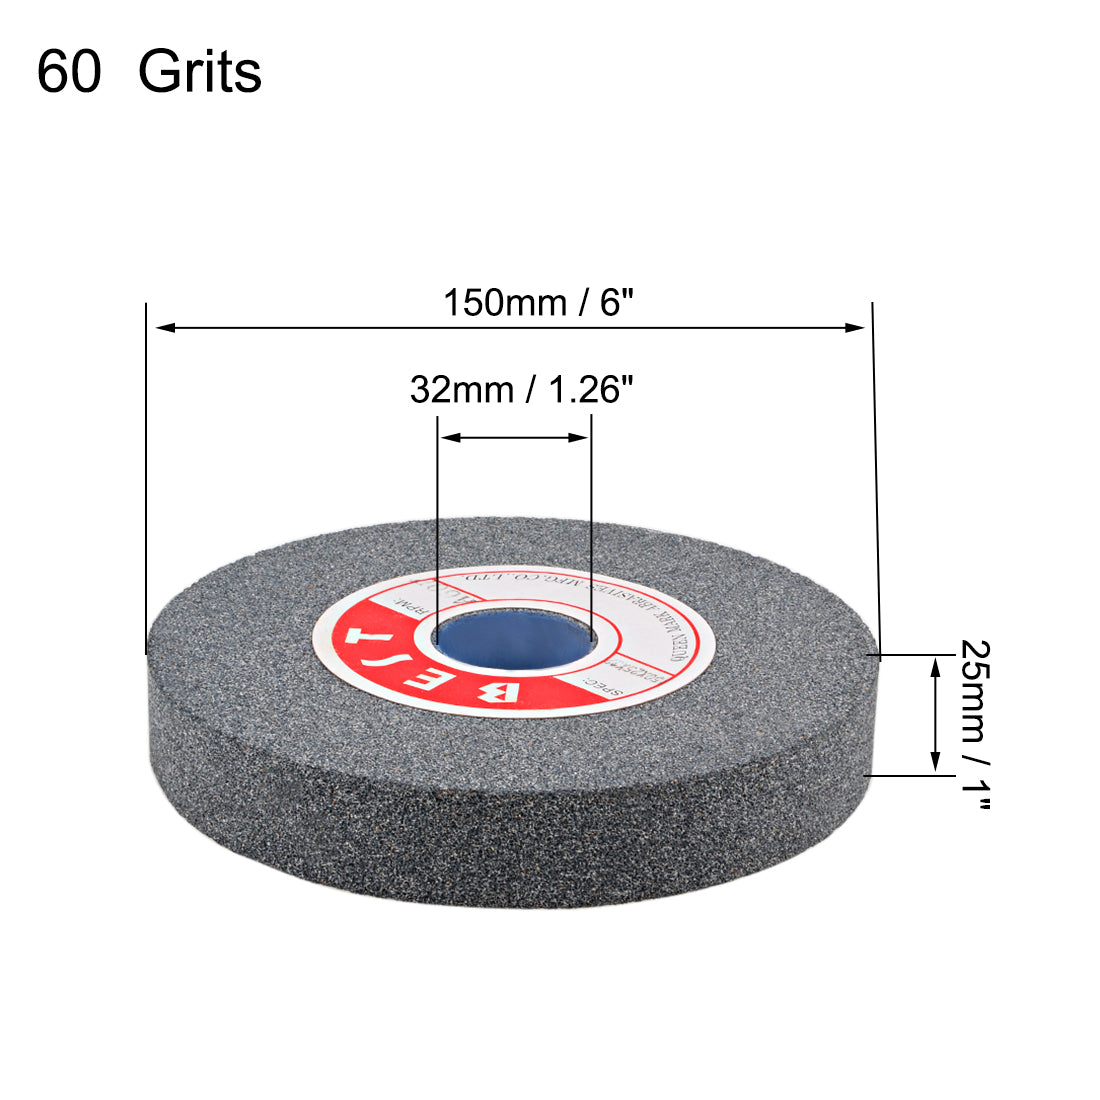 Uxcell Uxcell 6-Inch Bench Grinding Wheels Aluminum Oxide A 80 Grit for Surface Grinding